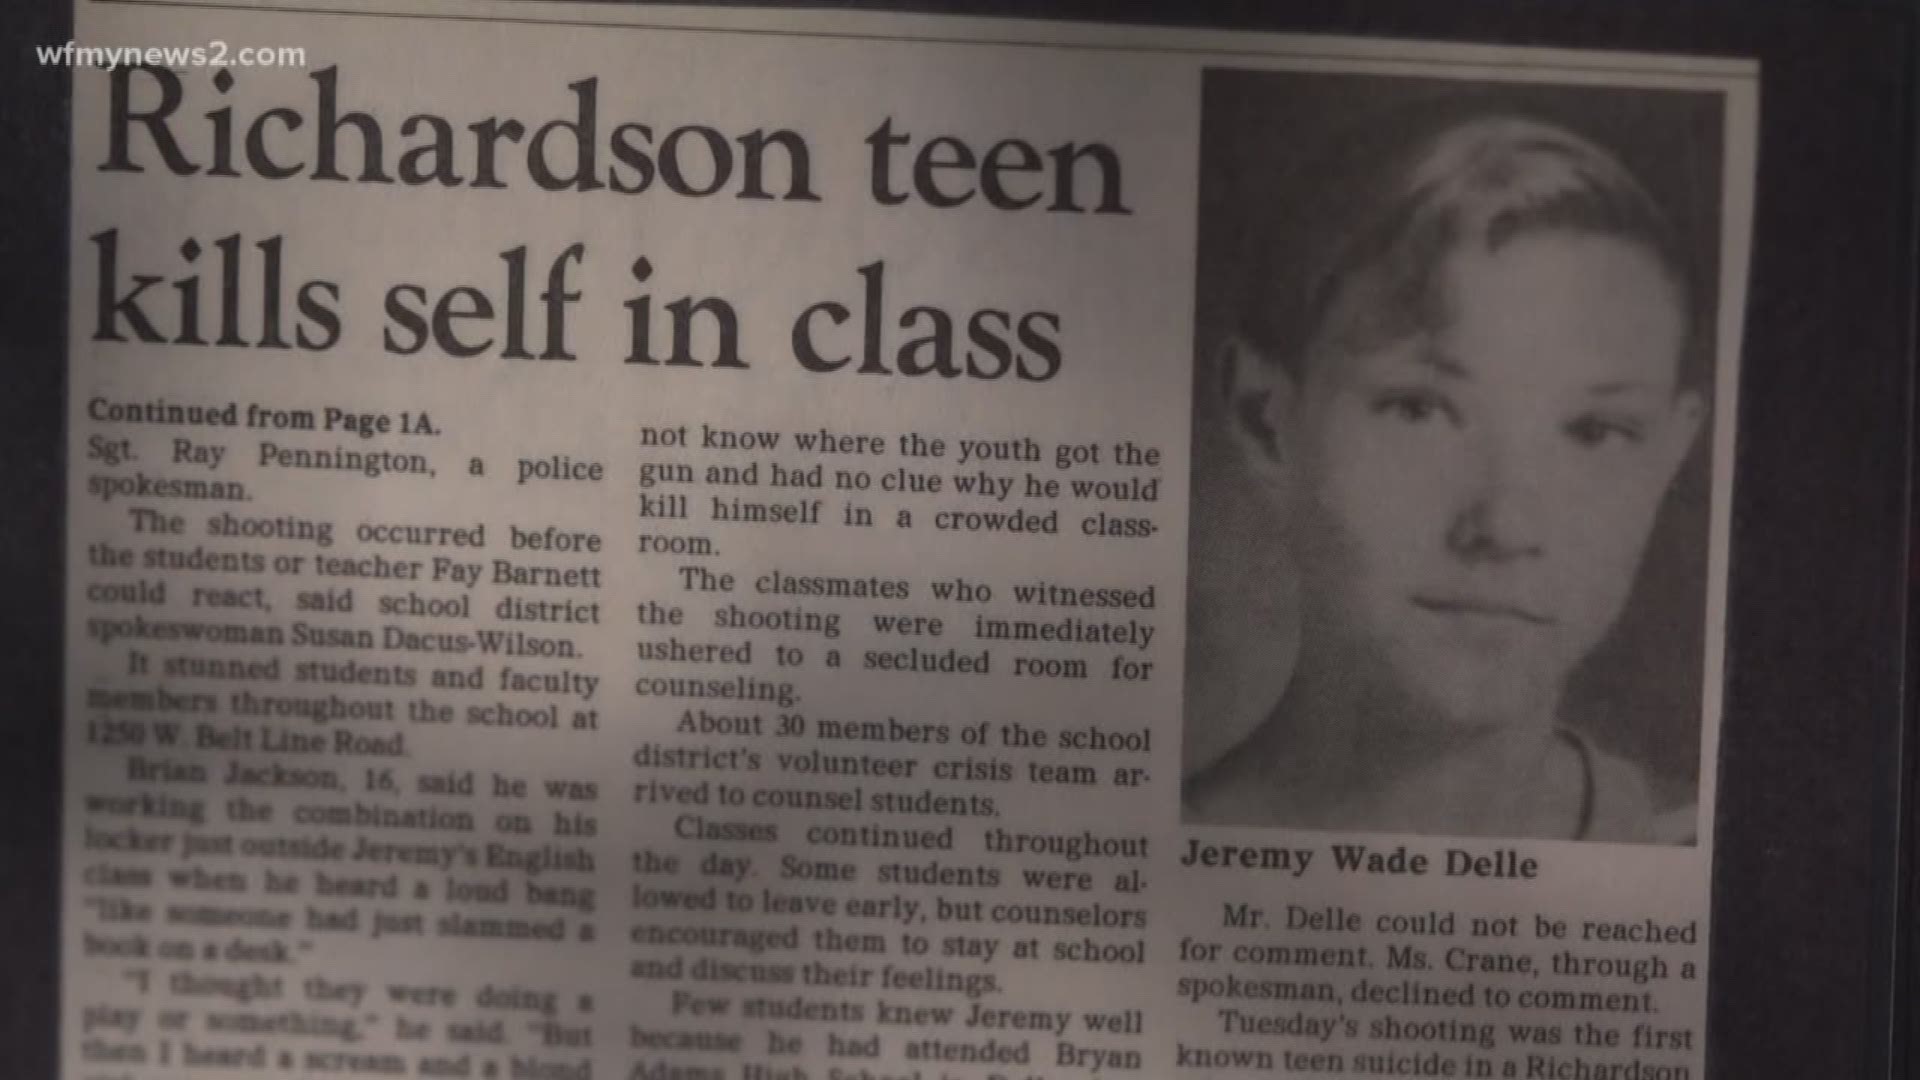 27 years ago, 15-year-old Jeremy Delle killed himself in front of his second-period English class in Richardson Texas.
Jeremy's mother, Wanda Delle, hasn't spoken publicly about her son's death until now.